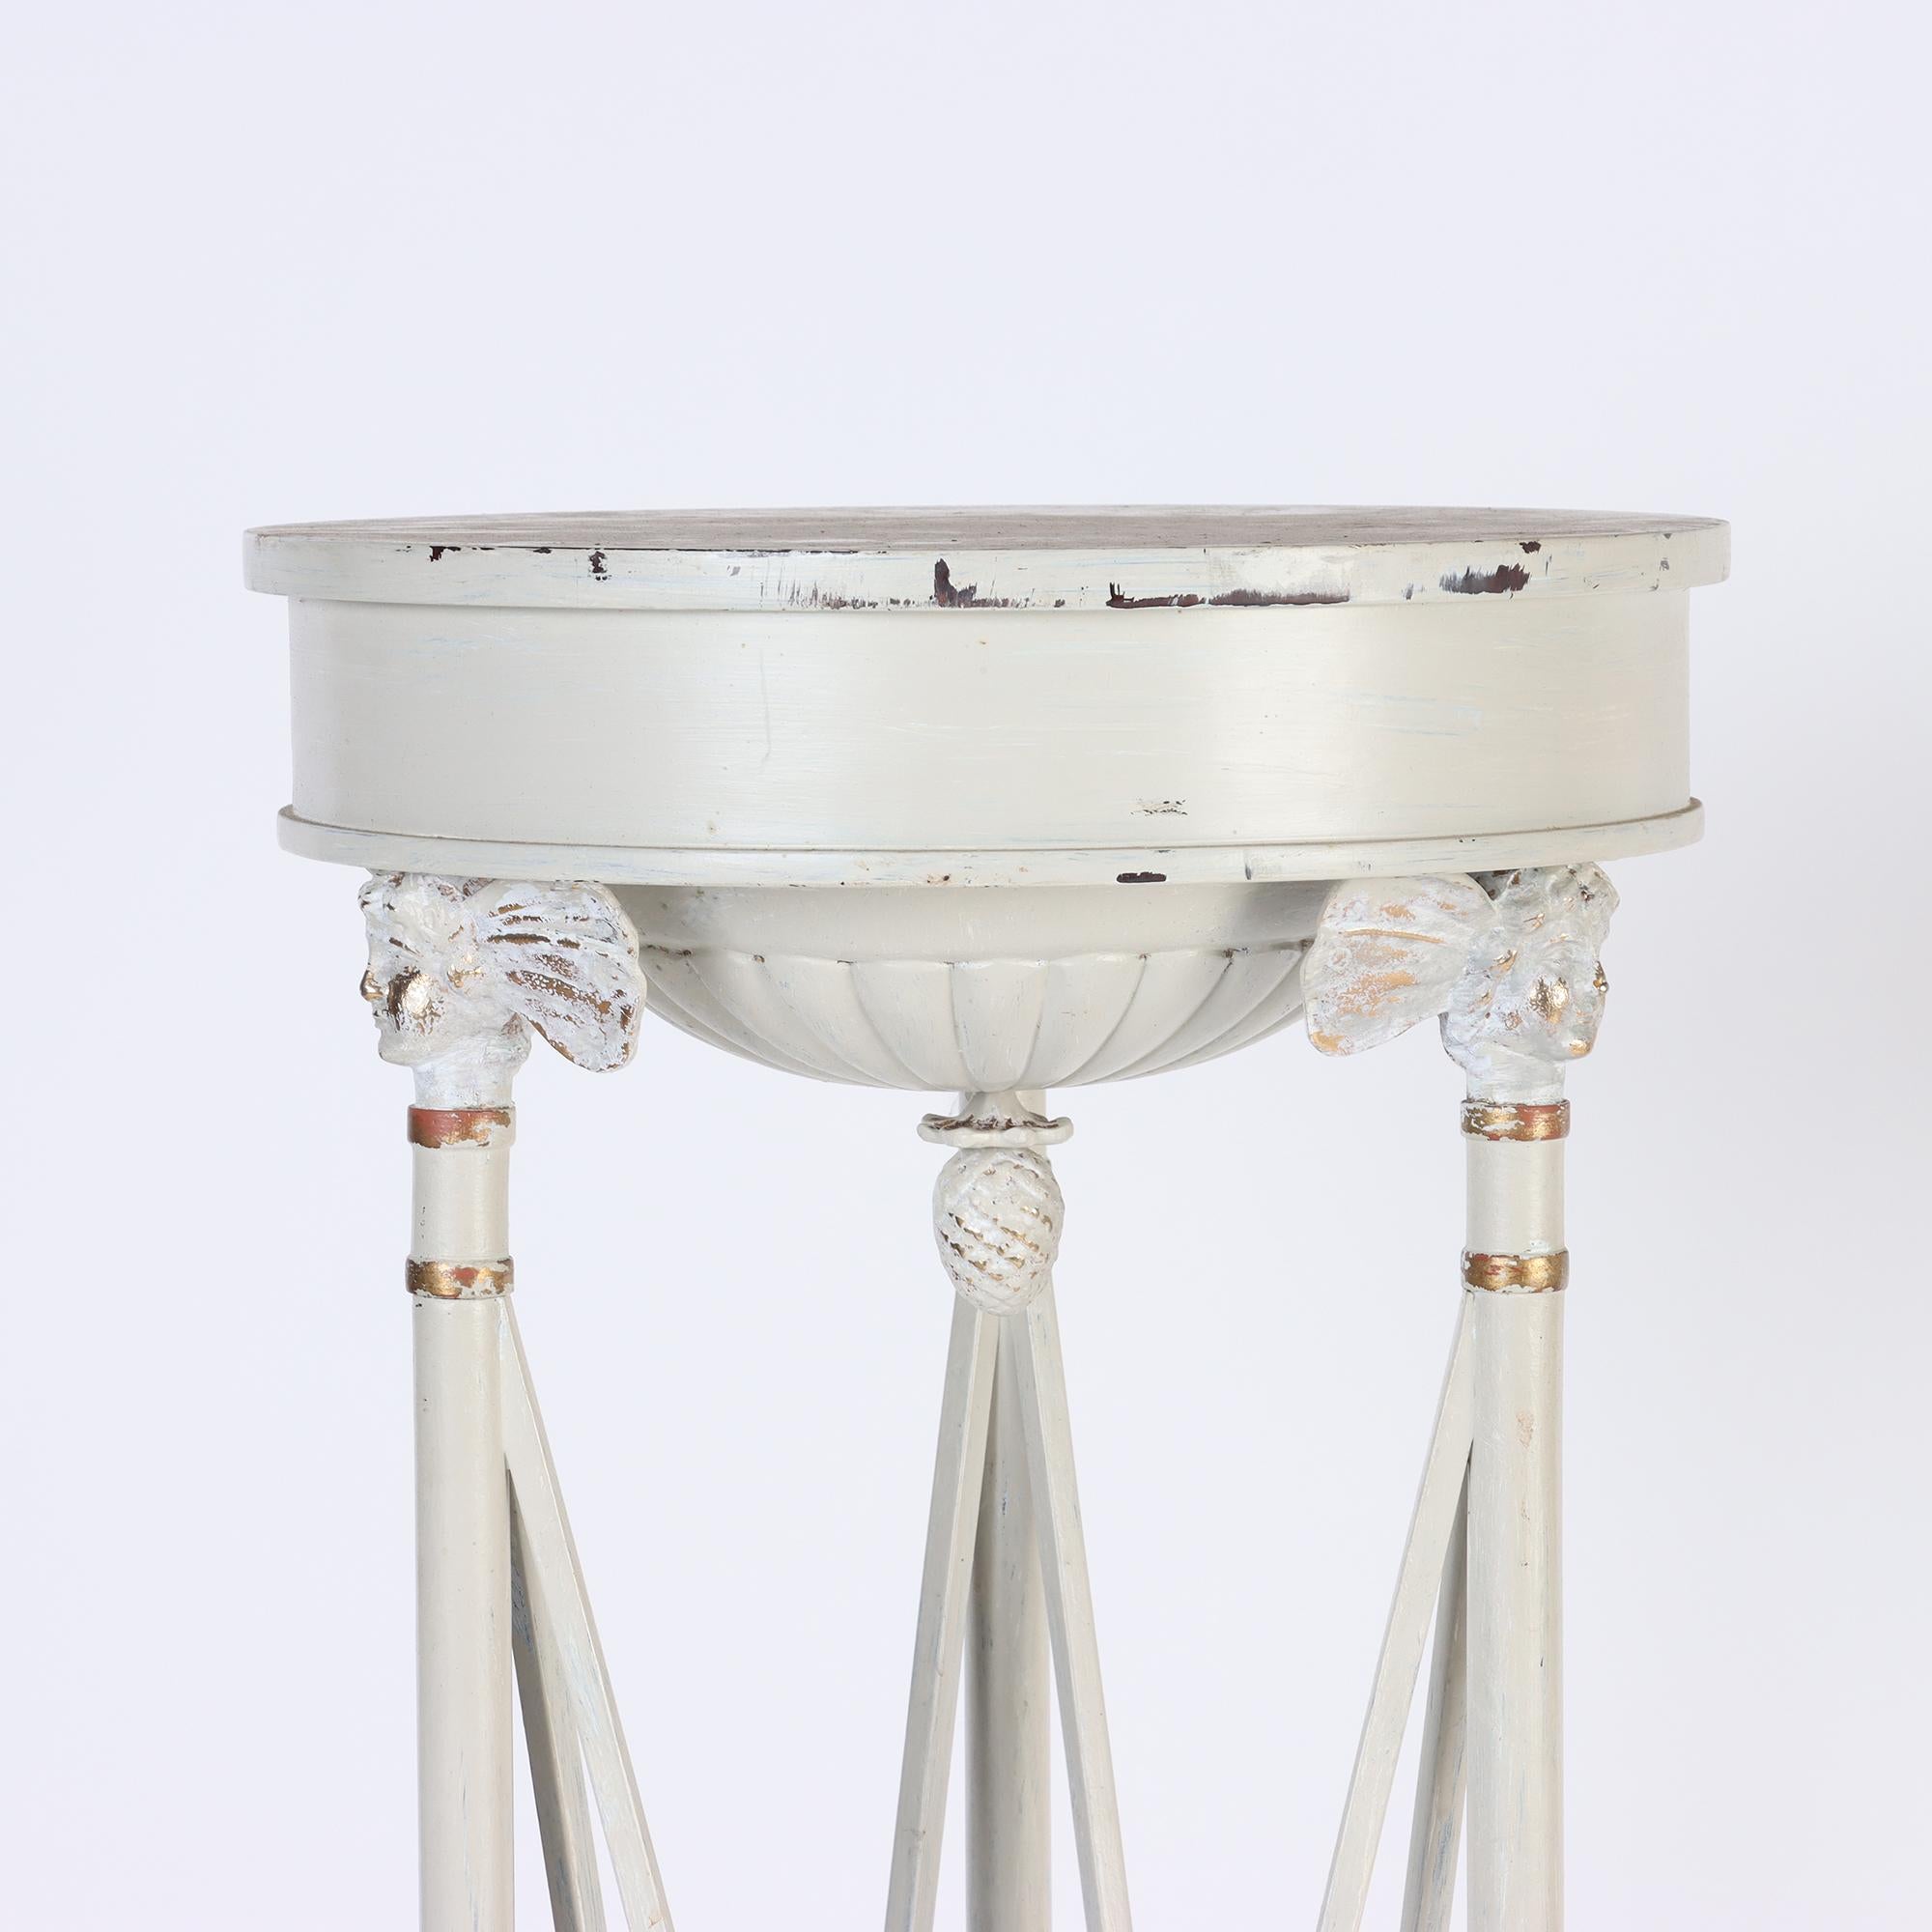 A pair of tall Neoclassical style white painted with partial gilt pillars/pedestals resting on a concave tripartite platform.